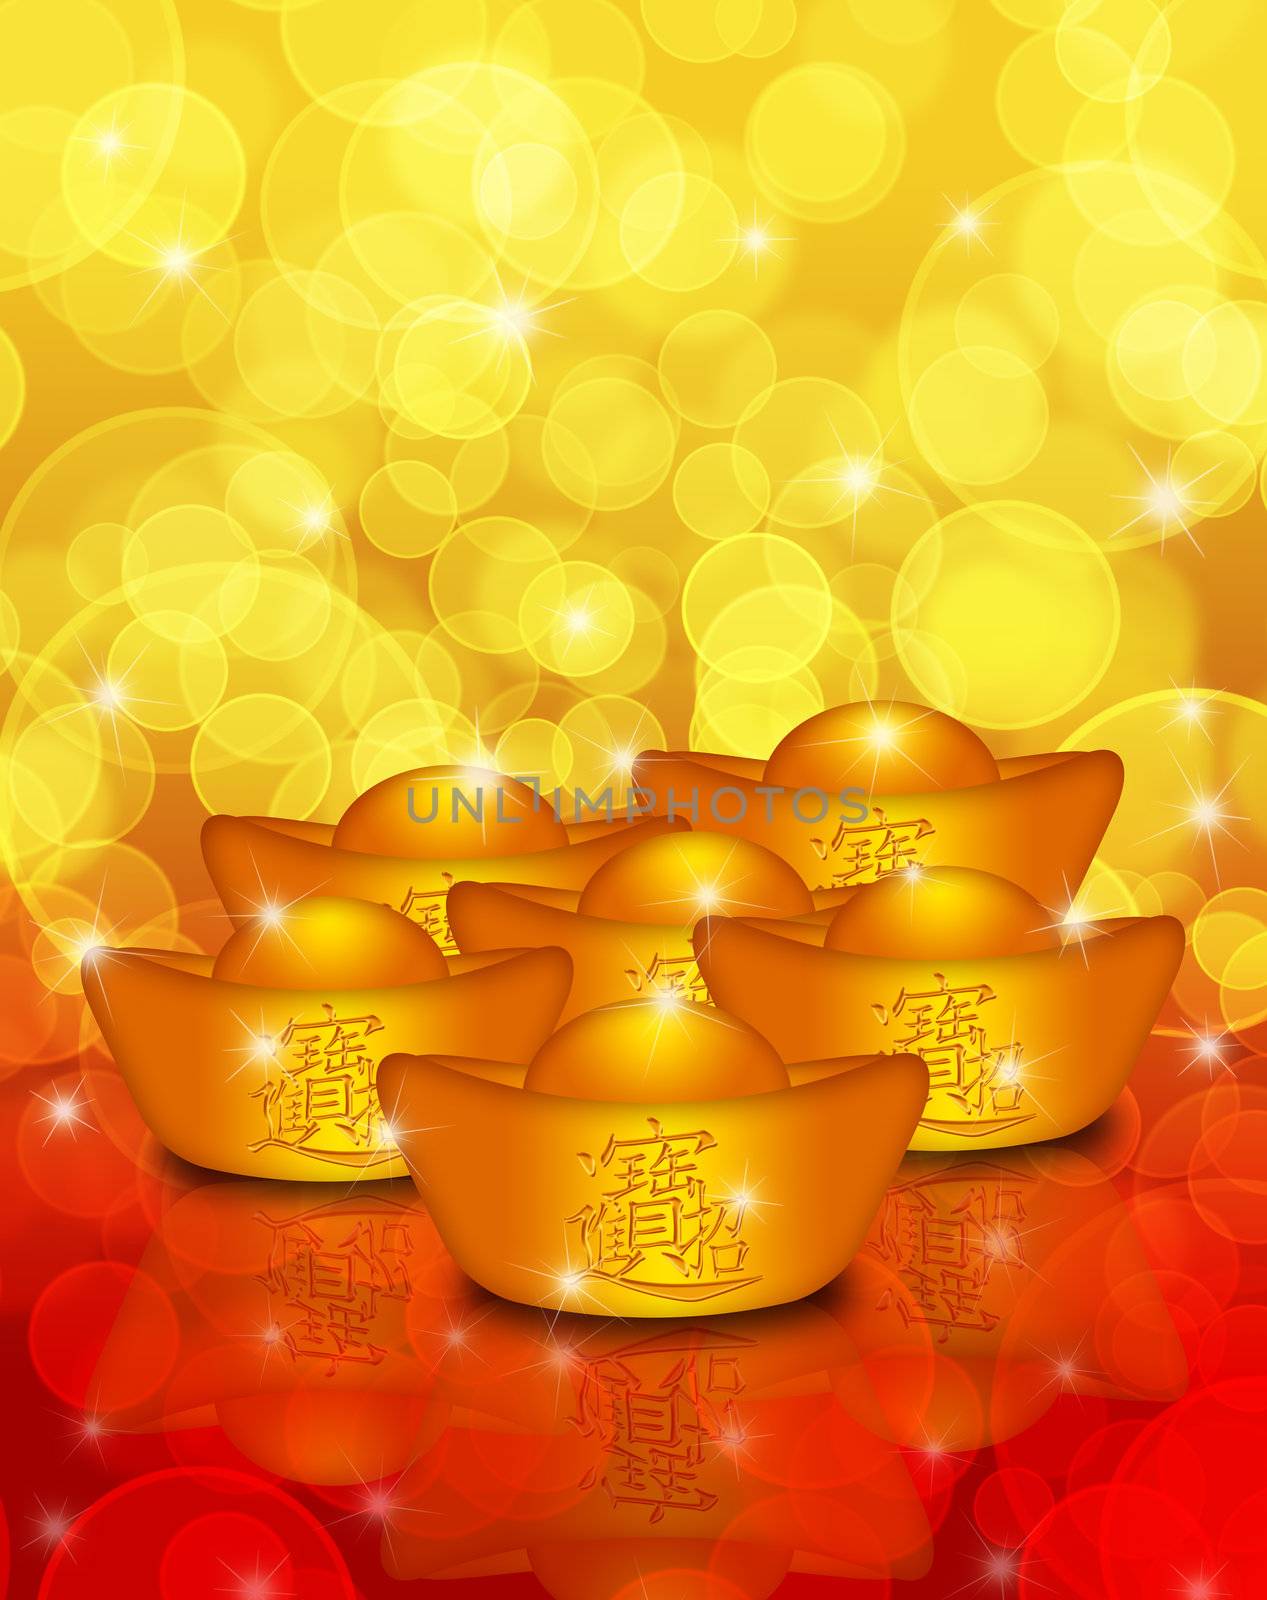 Chinese Gold Bars with Text Bringing in Wealth and Treasure on Blurred Background Illustration